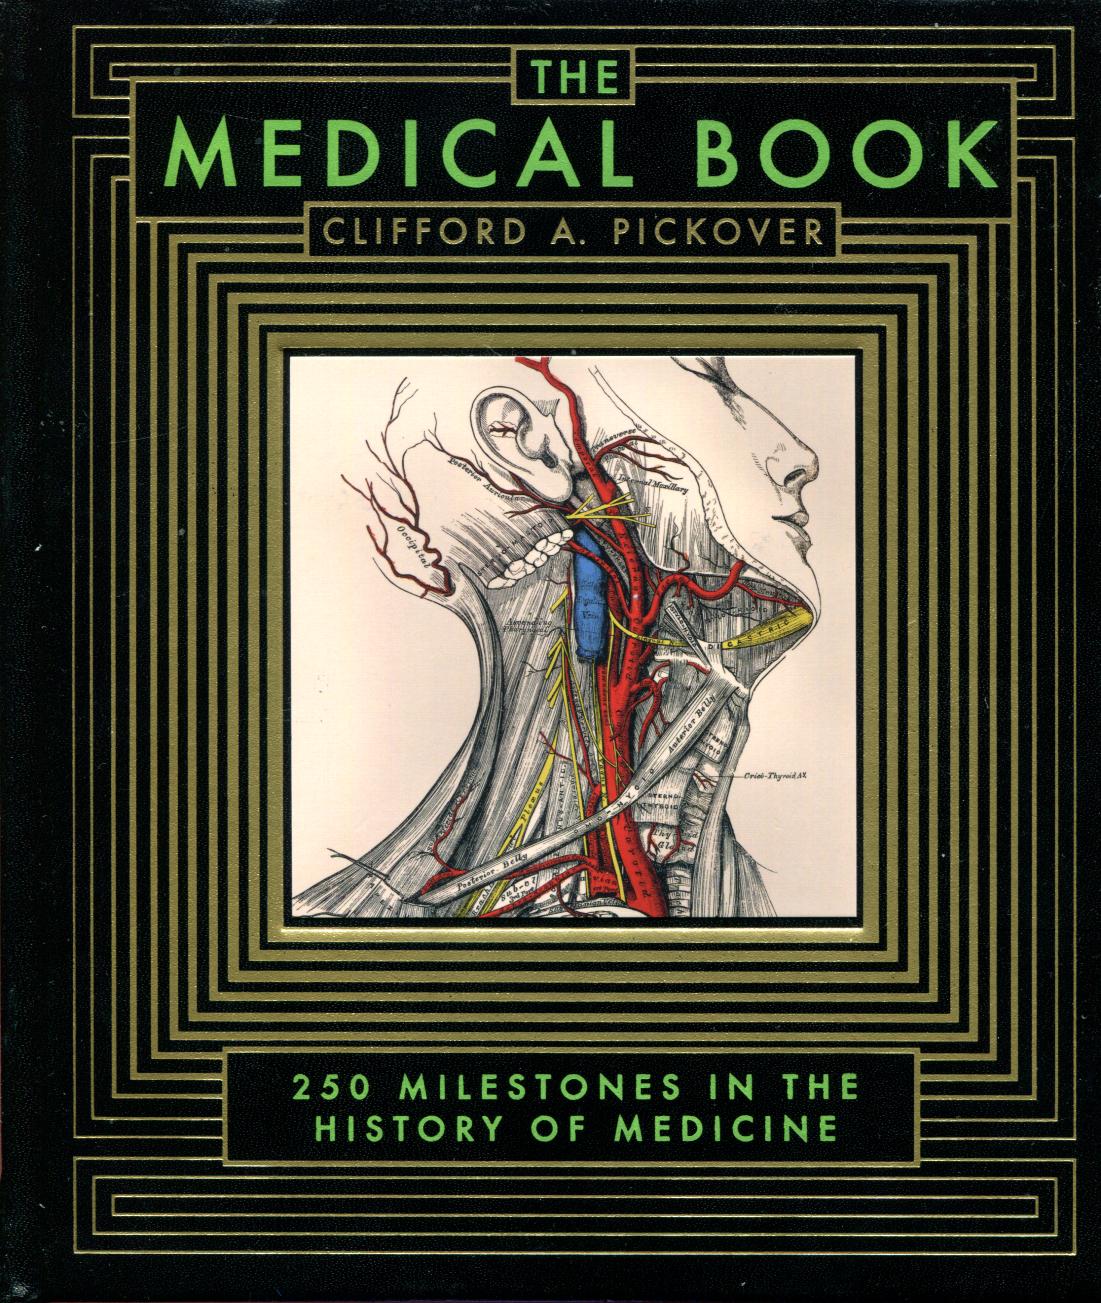 PICKOVER, CLIFFORD A. - The Medical Book. 250 Milestones in the History of Medicine.